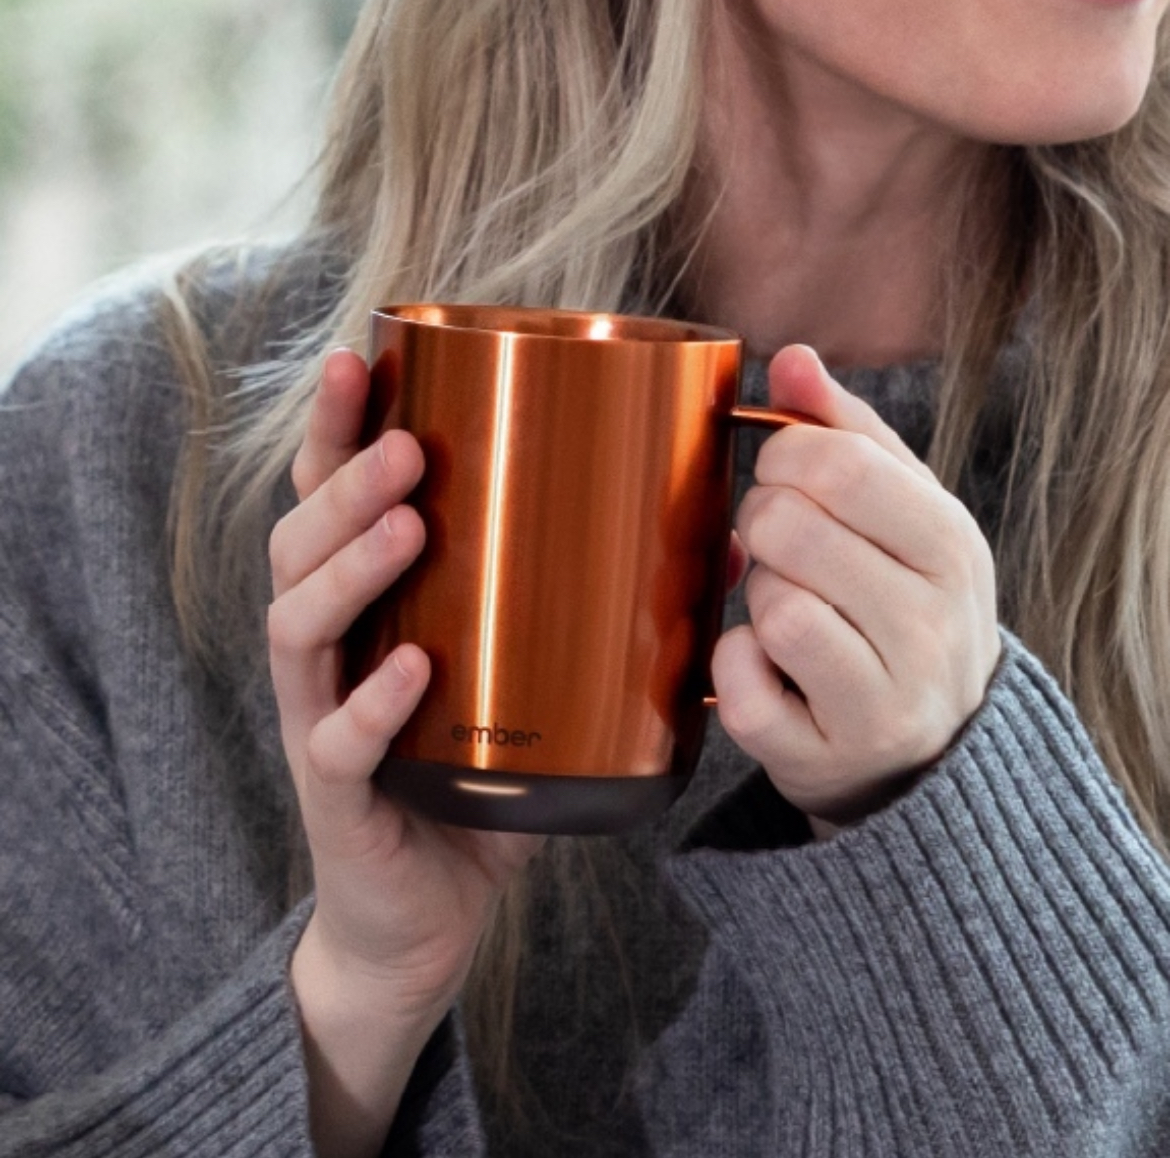 A woman holding a copper mug in her hands.